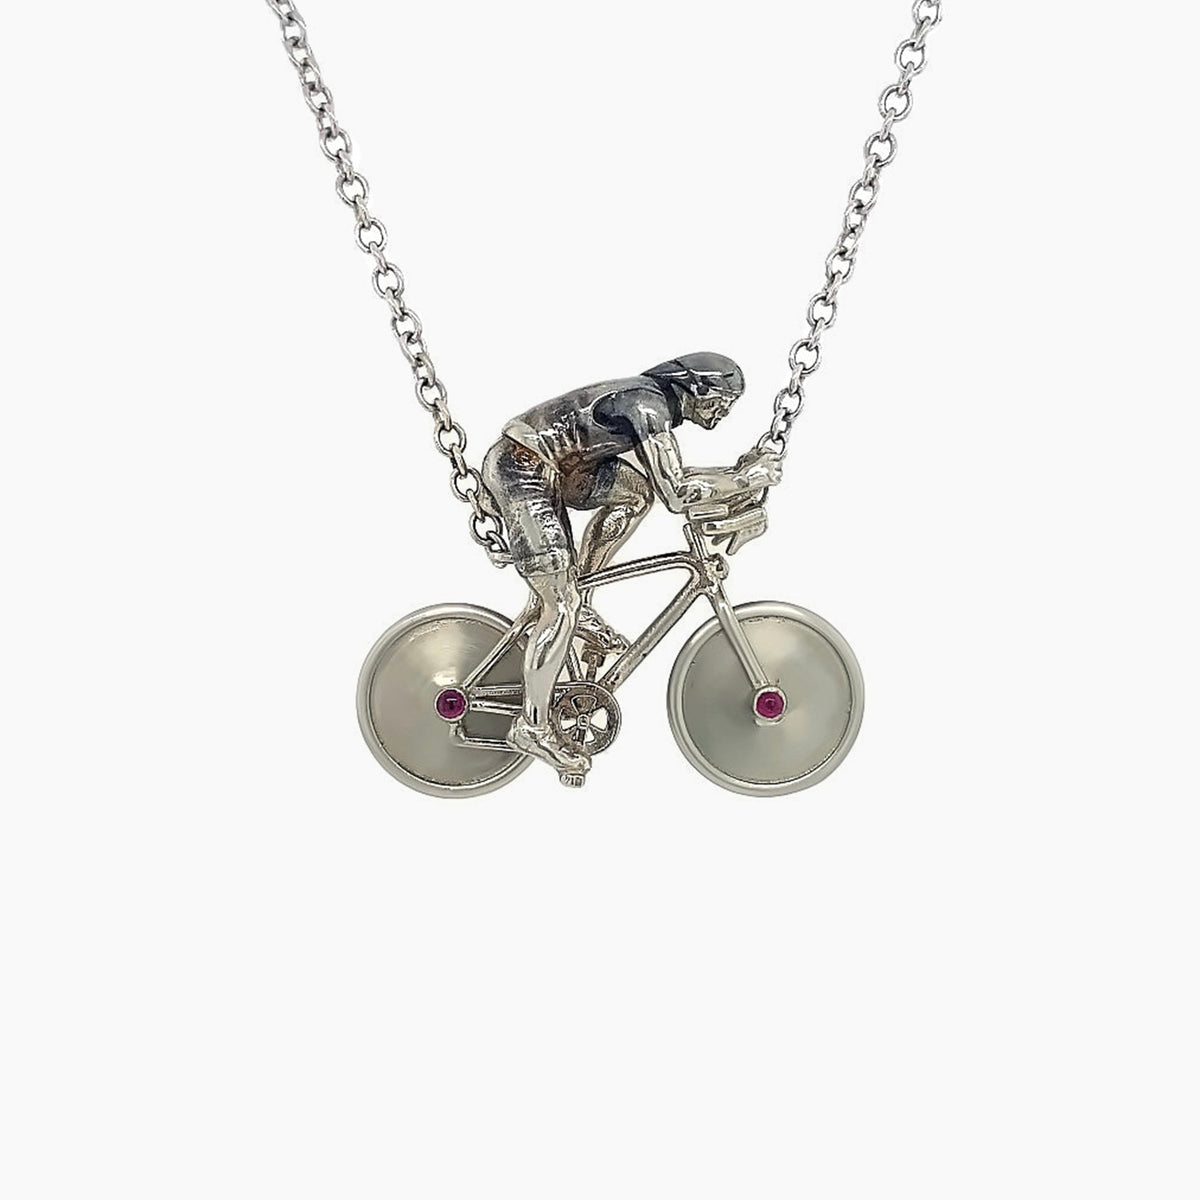 The Cyclist Gold Necklace